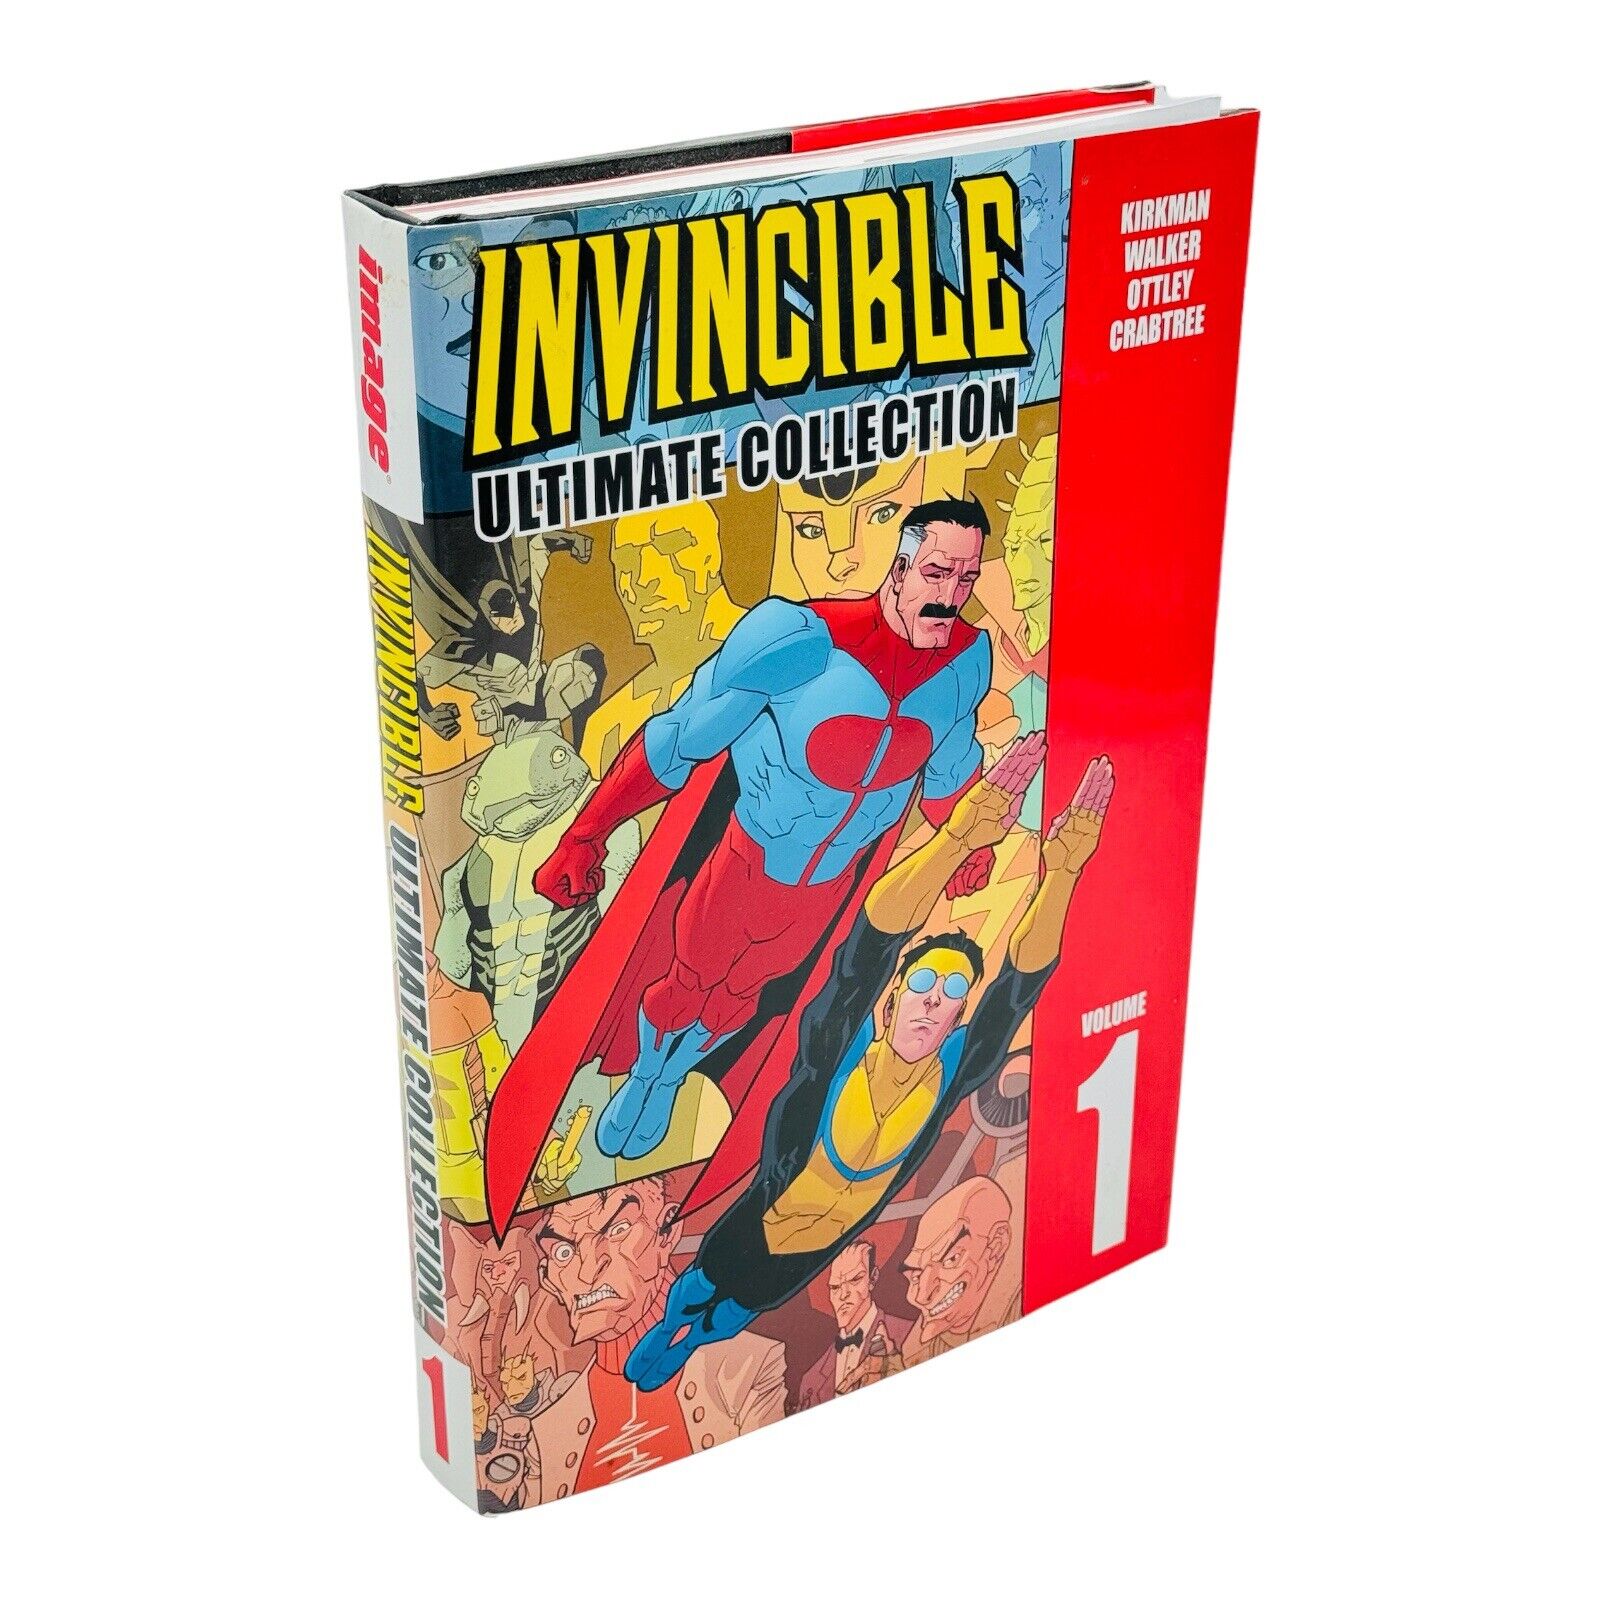 Invincible The Ultimate Collection Volume 1 Hardbook